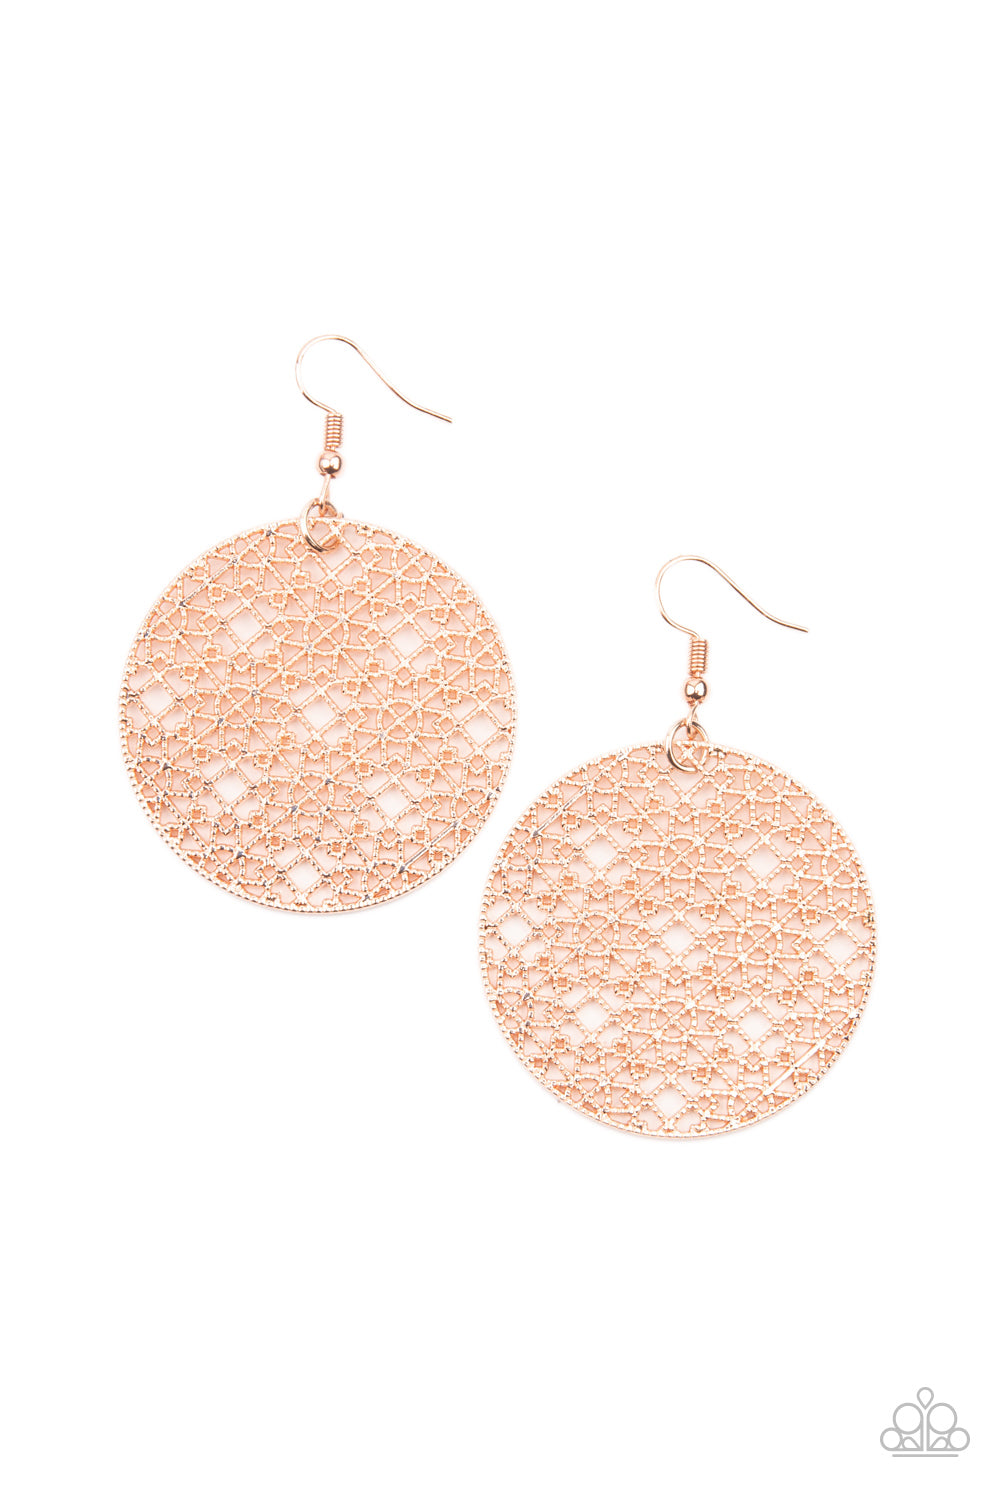 &lt;P&gt; Studded rose gold filigree fills the inside of a rose gold hoop, creating an airy mandala pattern. Earring attaches to a standard fishhook fitting.&lt;/P&gt;  

&lt;P&gt; &lt;I&gt;  Sold as one pair of earrings. &lt;/I&gt;  &lt;/P&gt;


&lt;img src=\&quot;https://d9b54x484lq62.cloudfront.net/paparazzi/shopping/images/517_tag150x115_1.png\&quot; alt=\&quot;New Kit\&quot; align=\&quot;middle\&quot; height=\&quot;50\&quot; width=\&quot;50\&quot;/&gt;